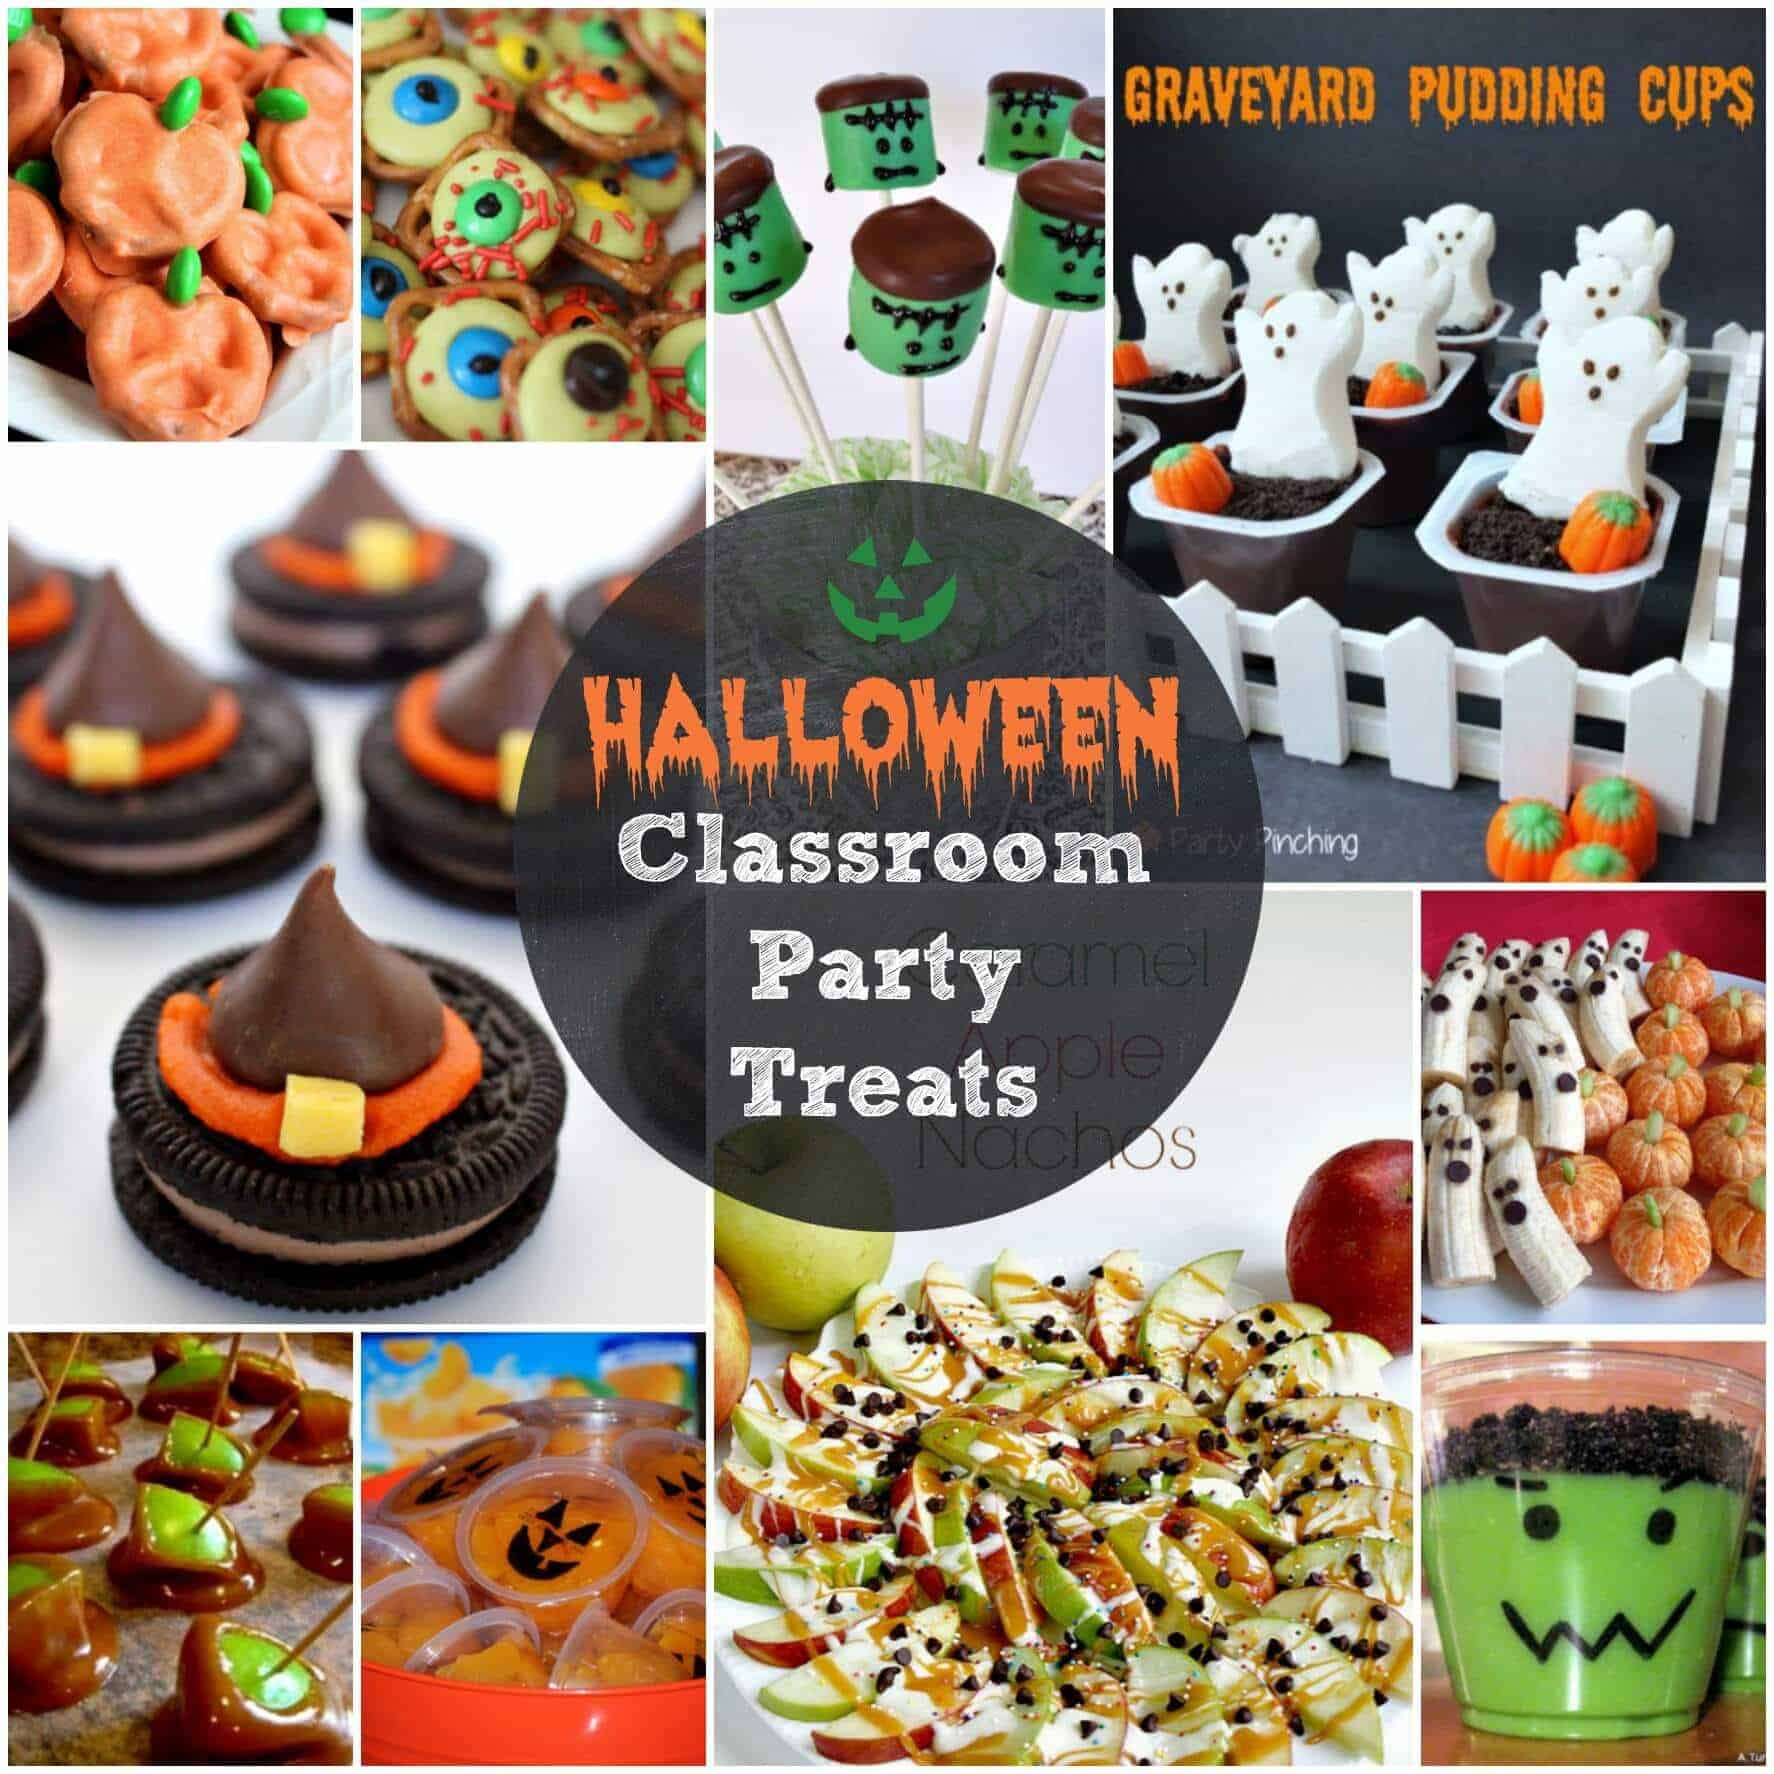 Halloween Classroom Party Ideas
 Easy Halloween Treats for Your Classroom Parties Page 2